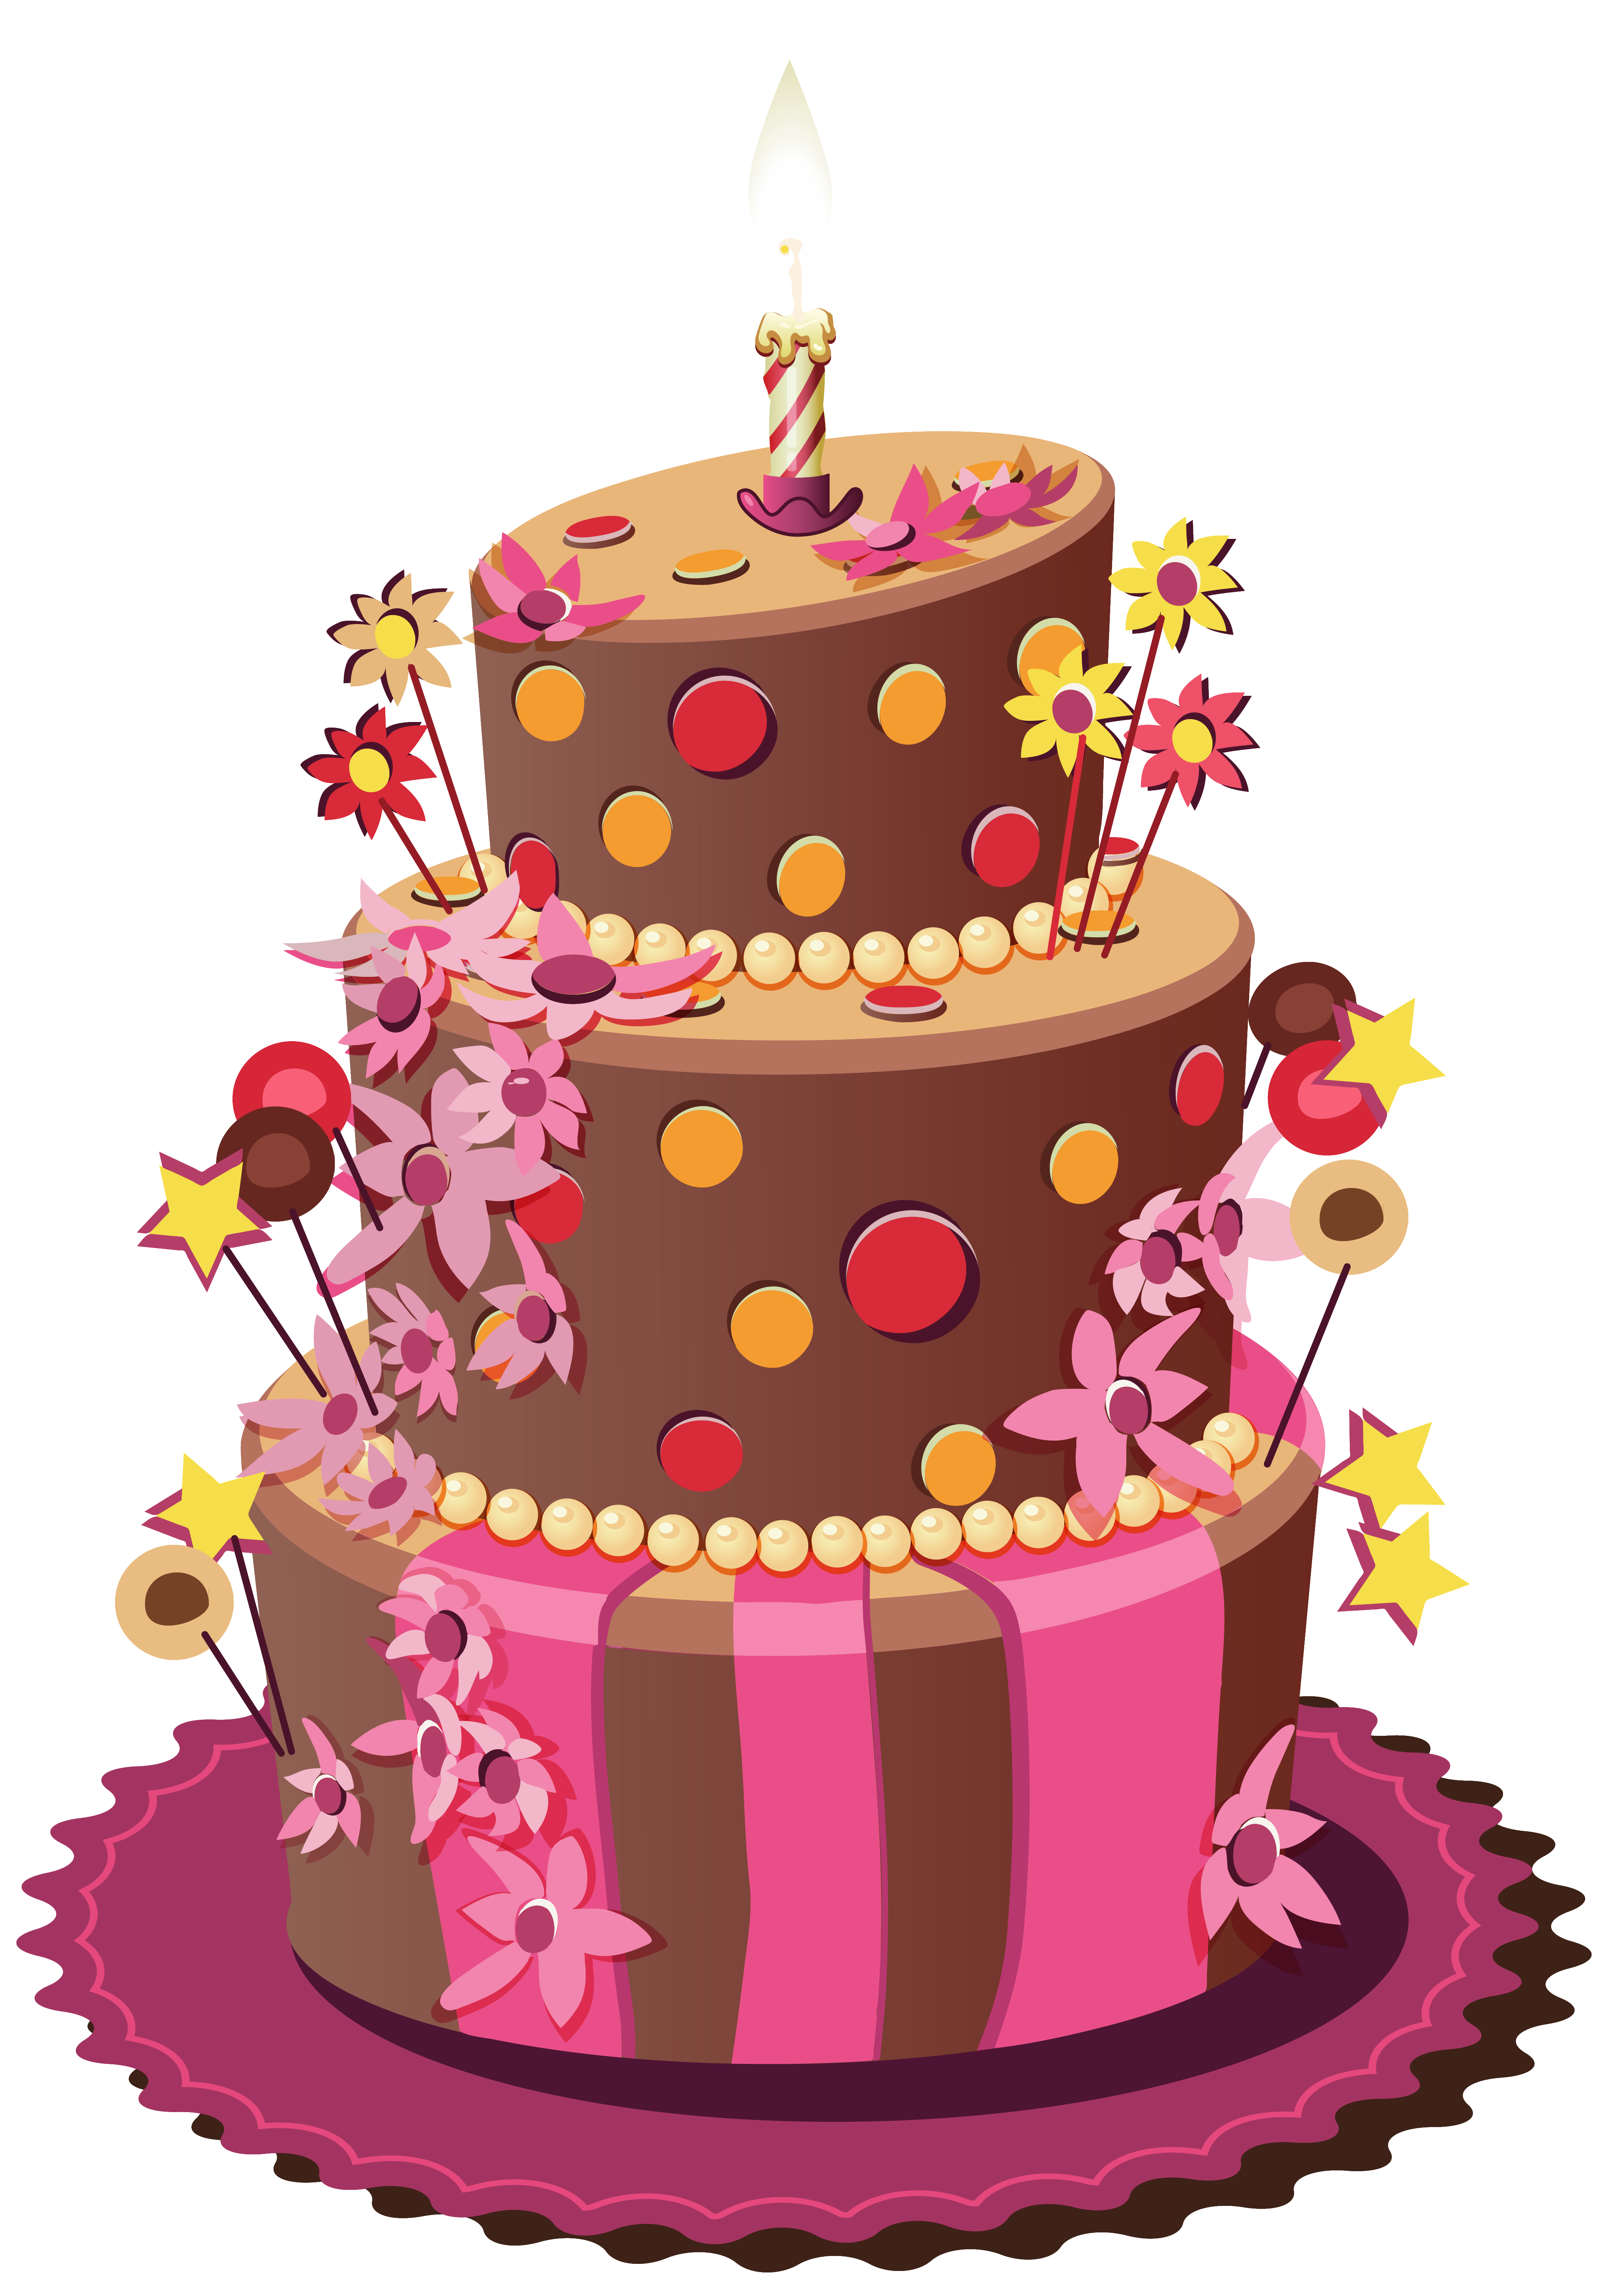 Birthday Cake Icon, Transparent Birthday Cake.PNG Images & Vector -  FreeIconsPNG